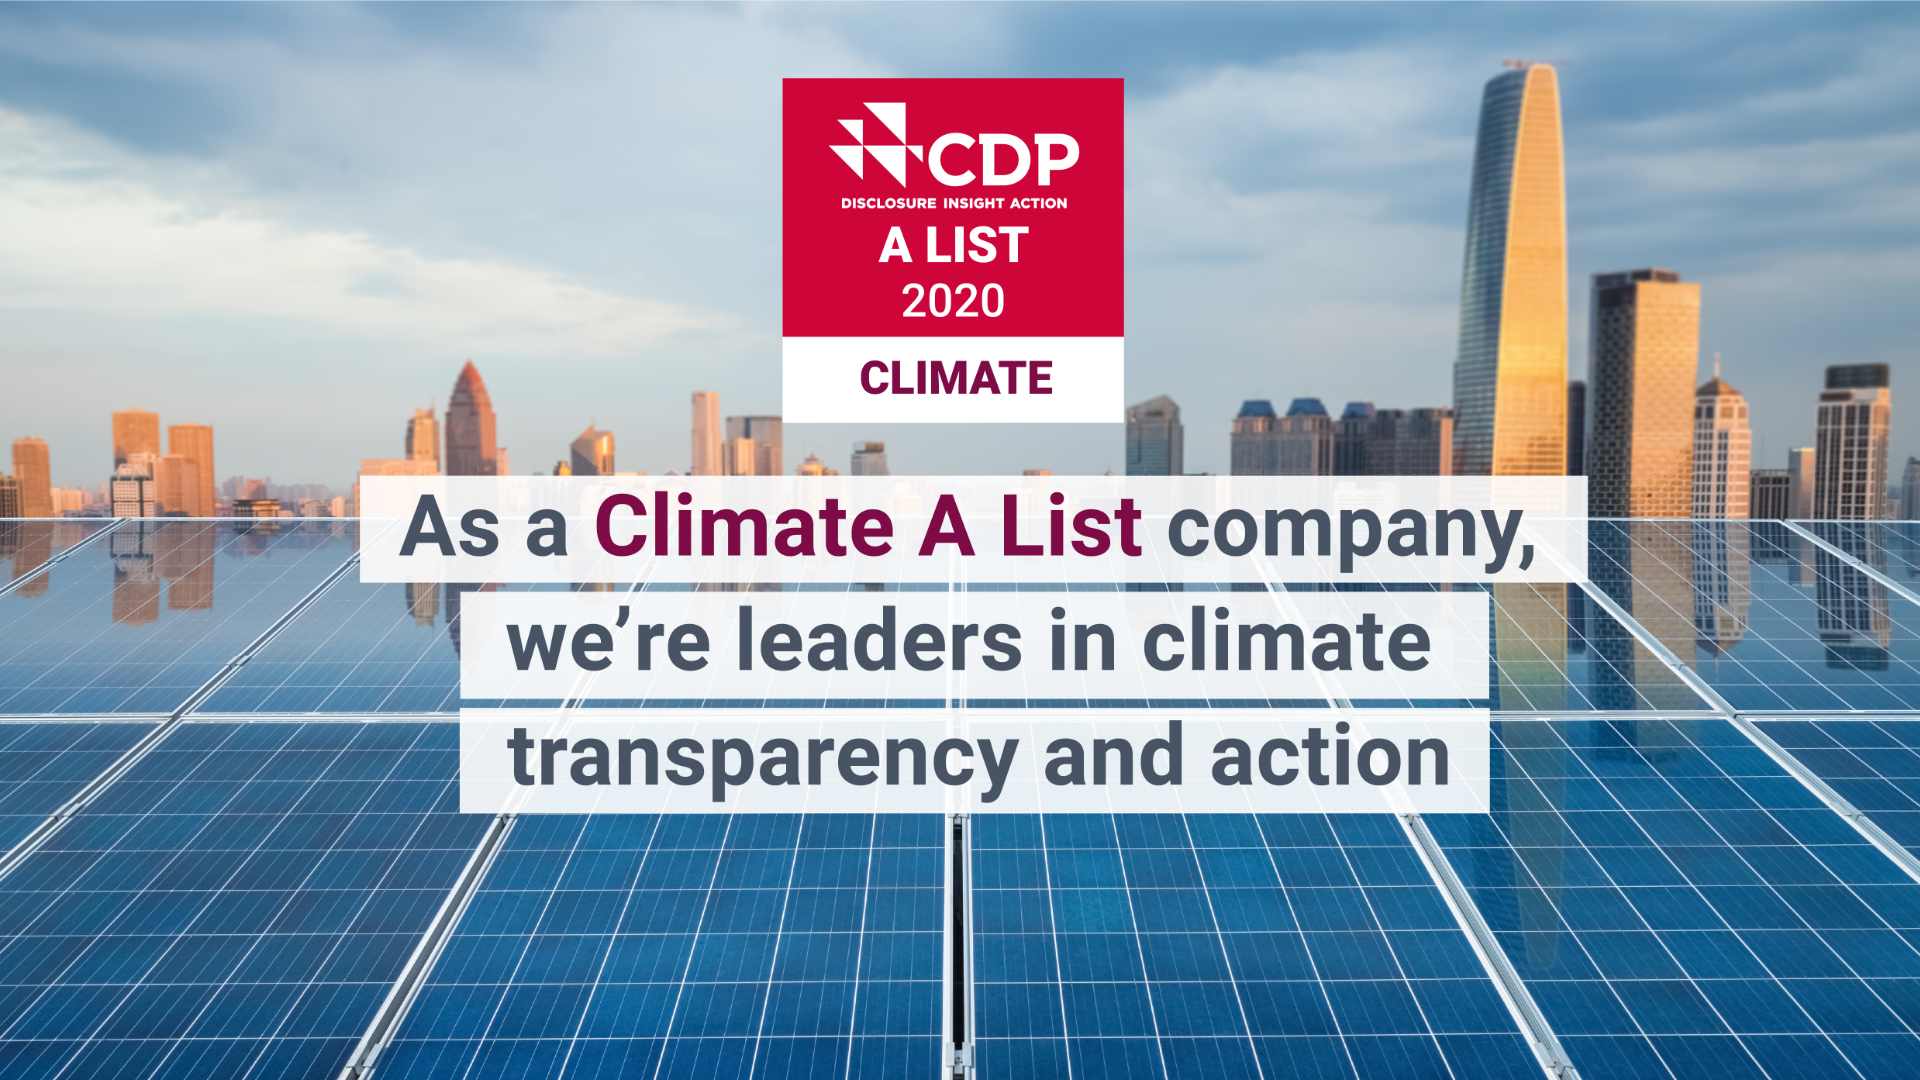 Alstom joins the climate “A List”